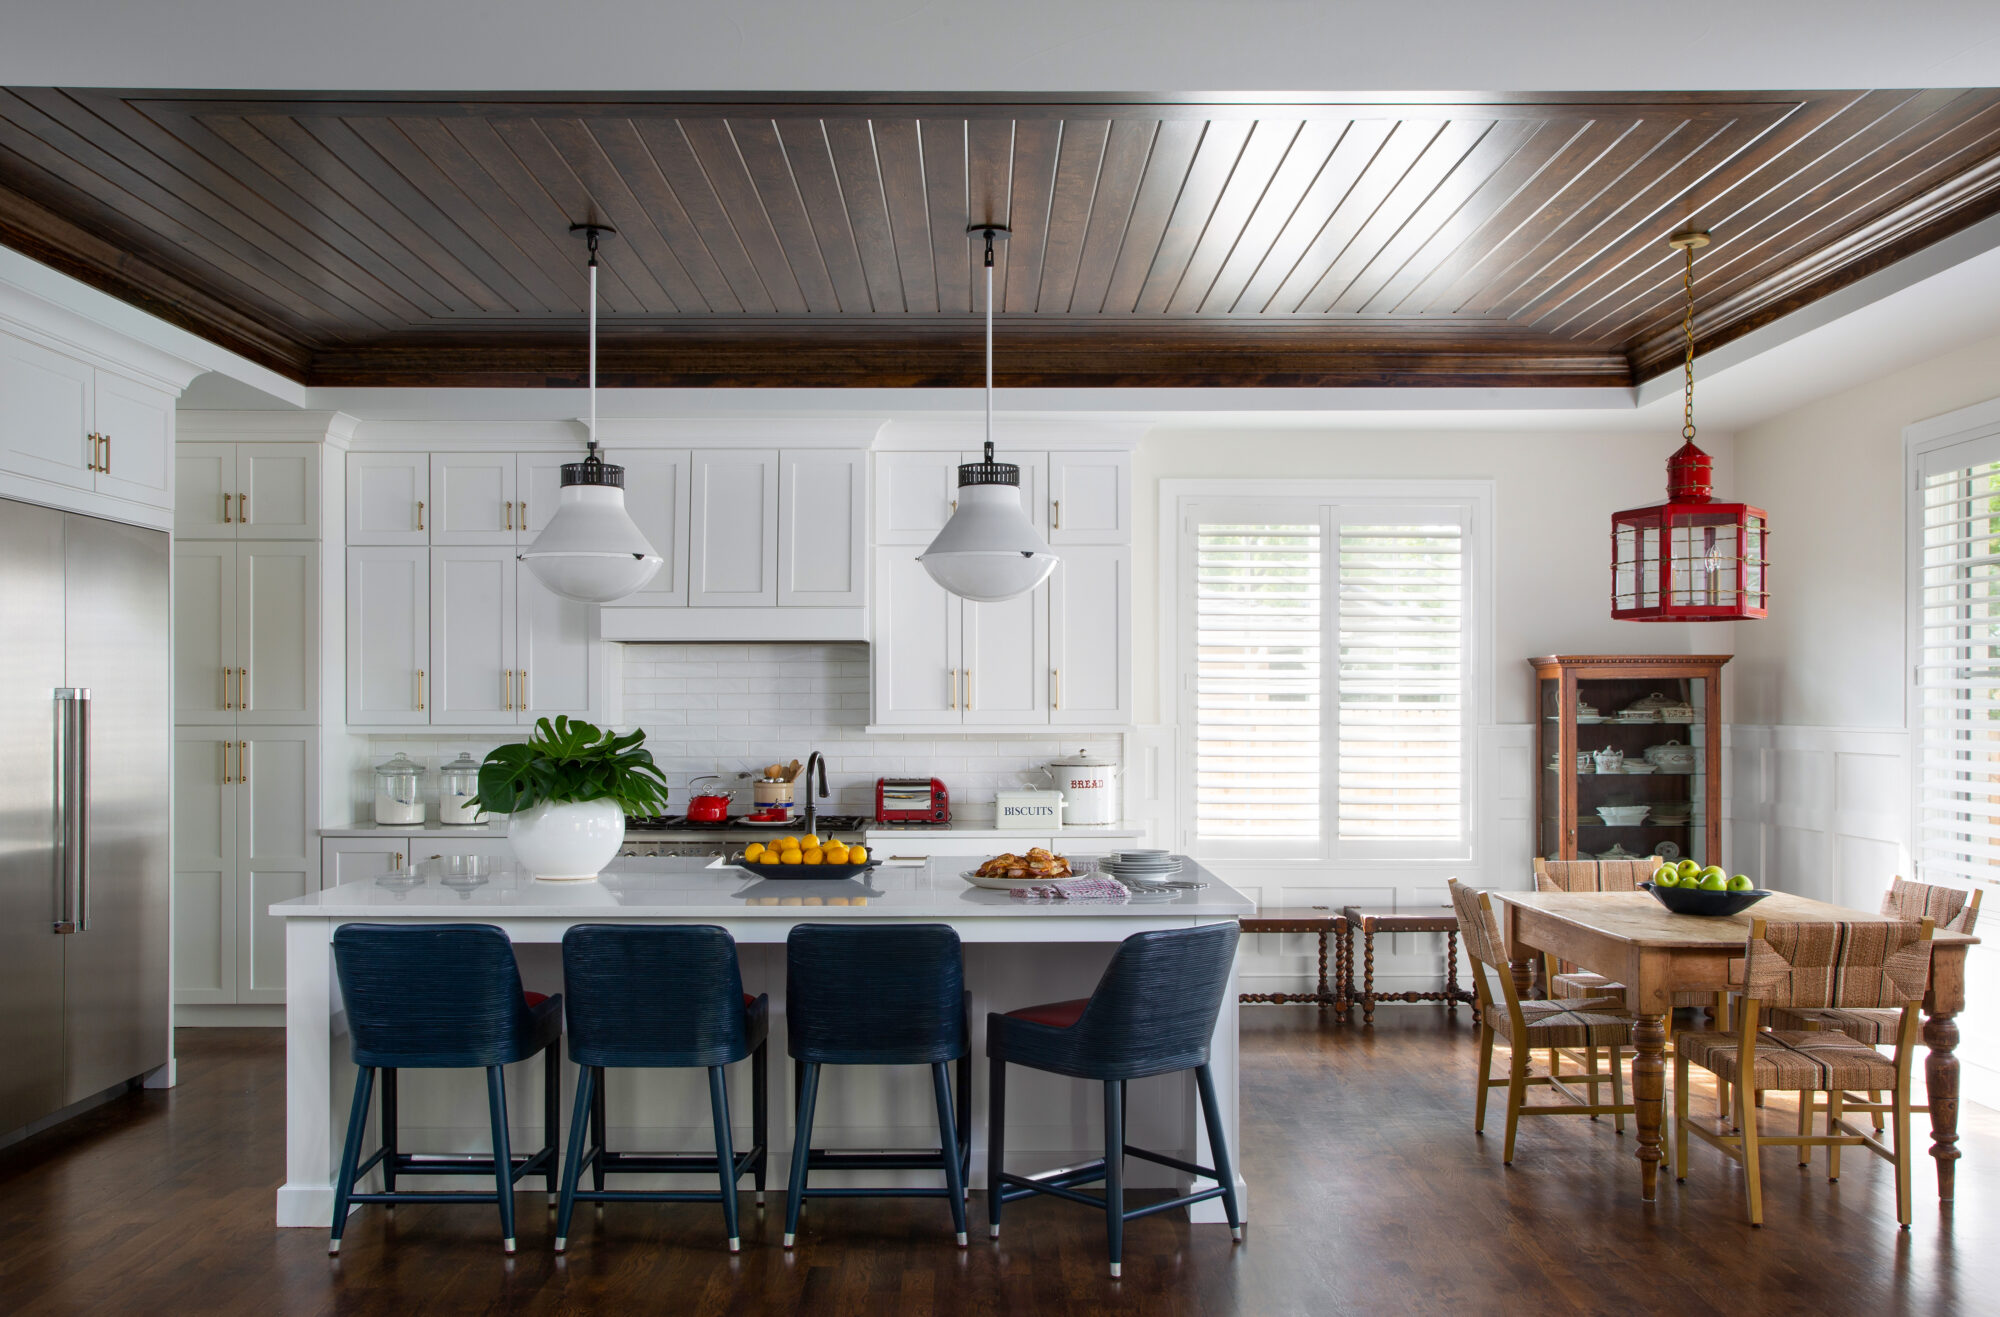 A large kitchen has a dark-wood ceiling and white cabinets.